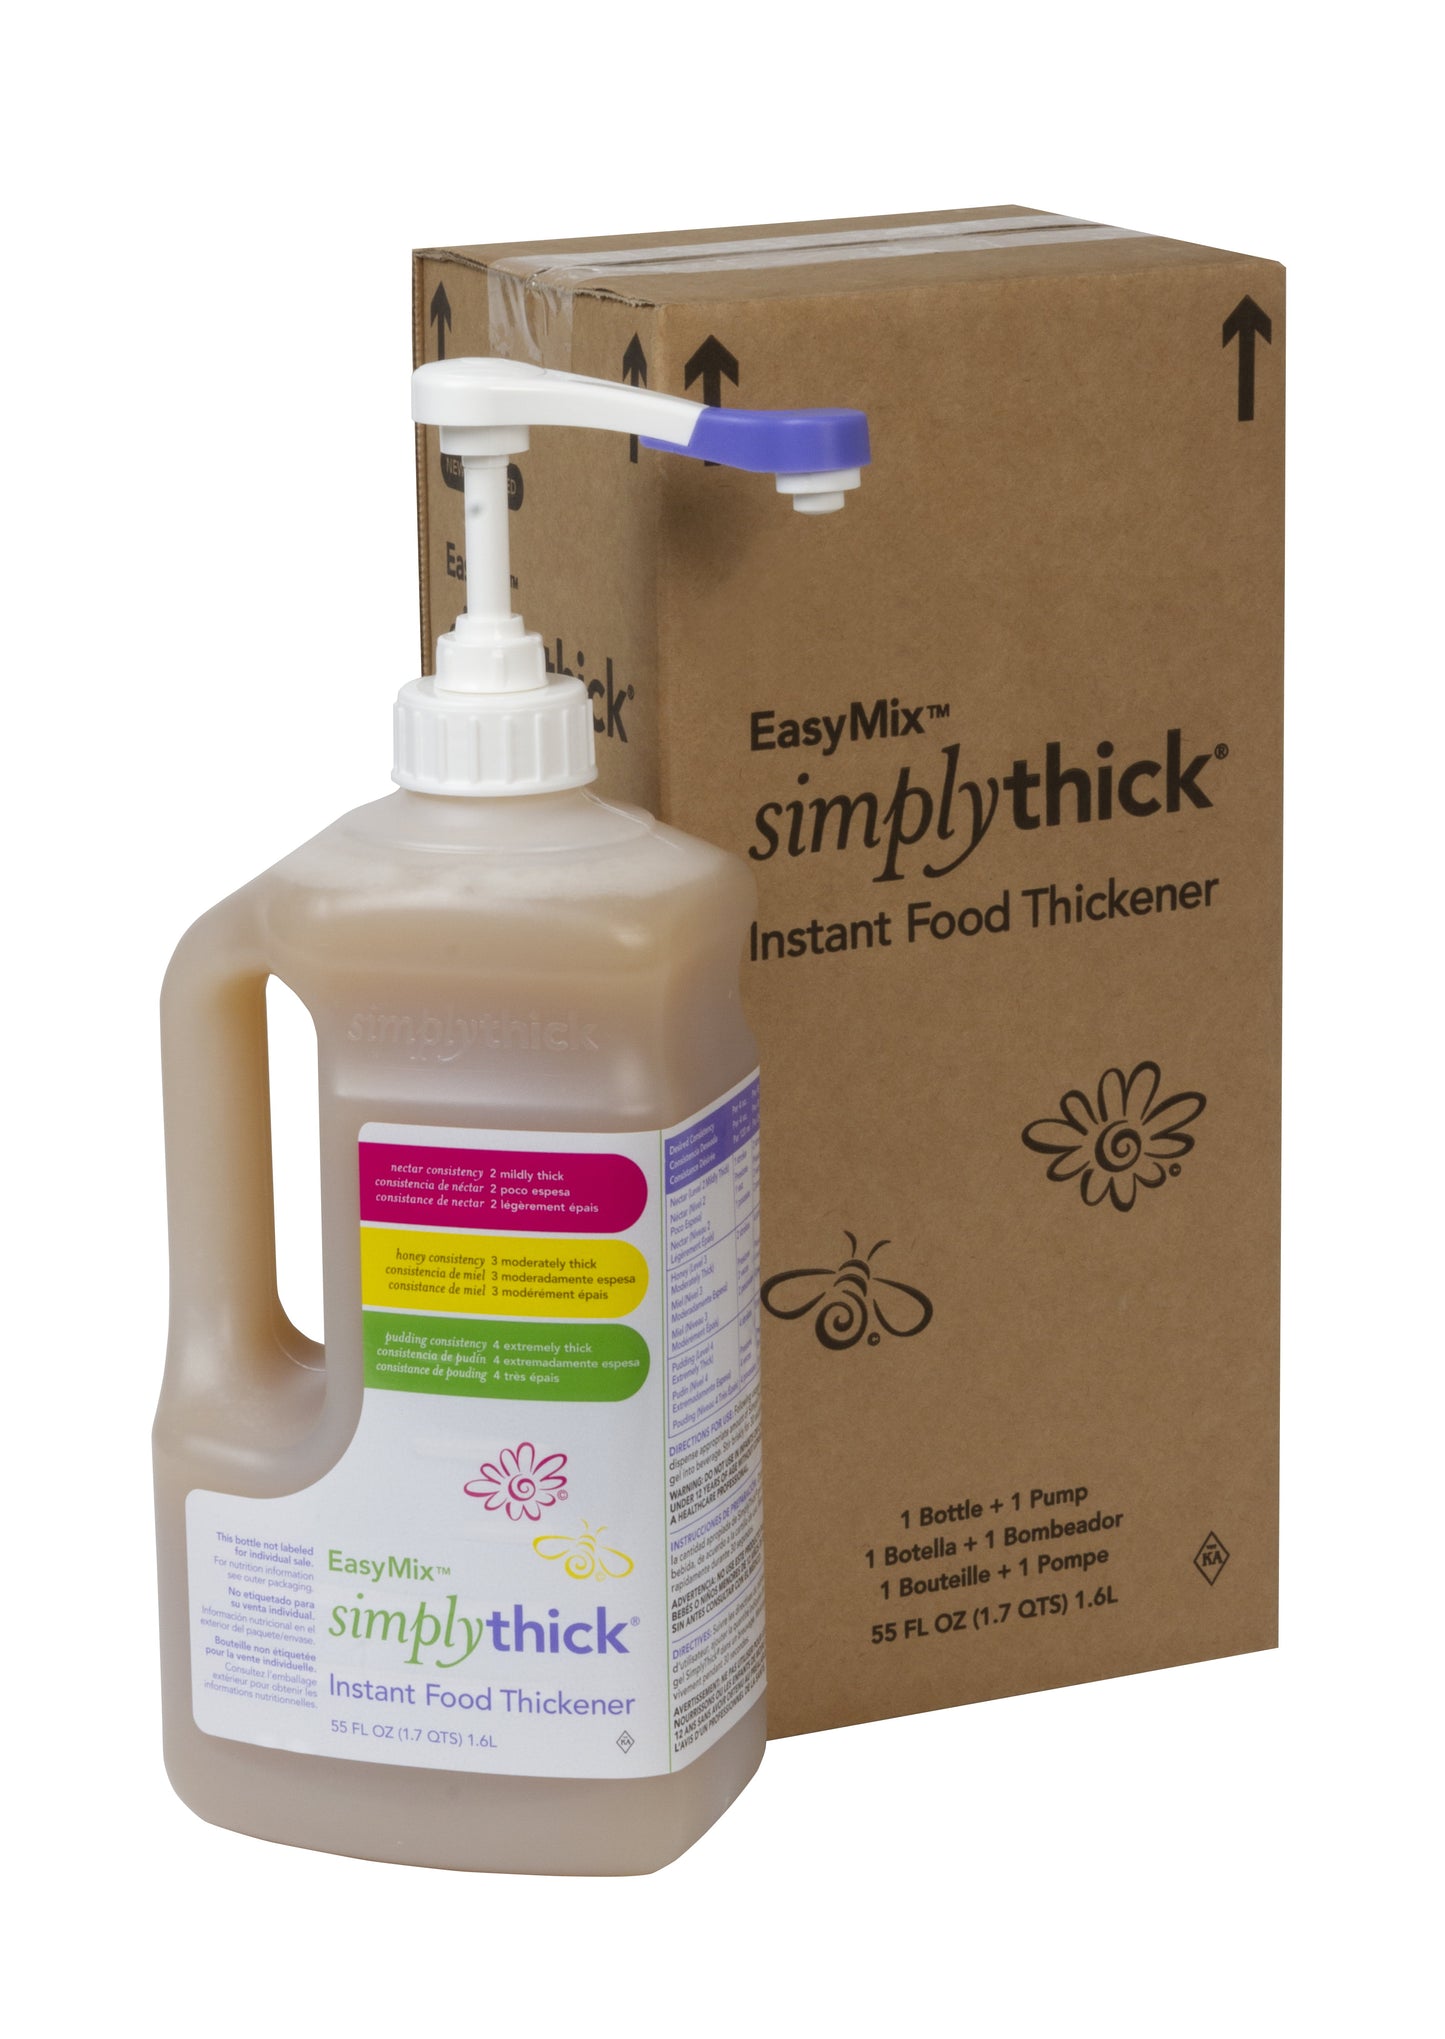 Easy Mix SimplyThick Instant Food Thickener, 1.6 Liter Pump Bottle, 1 Ct